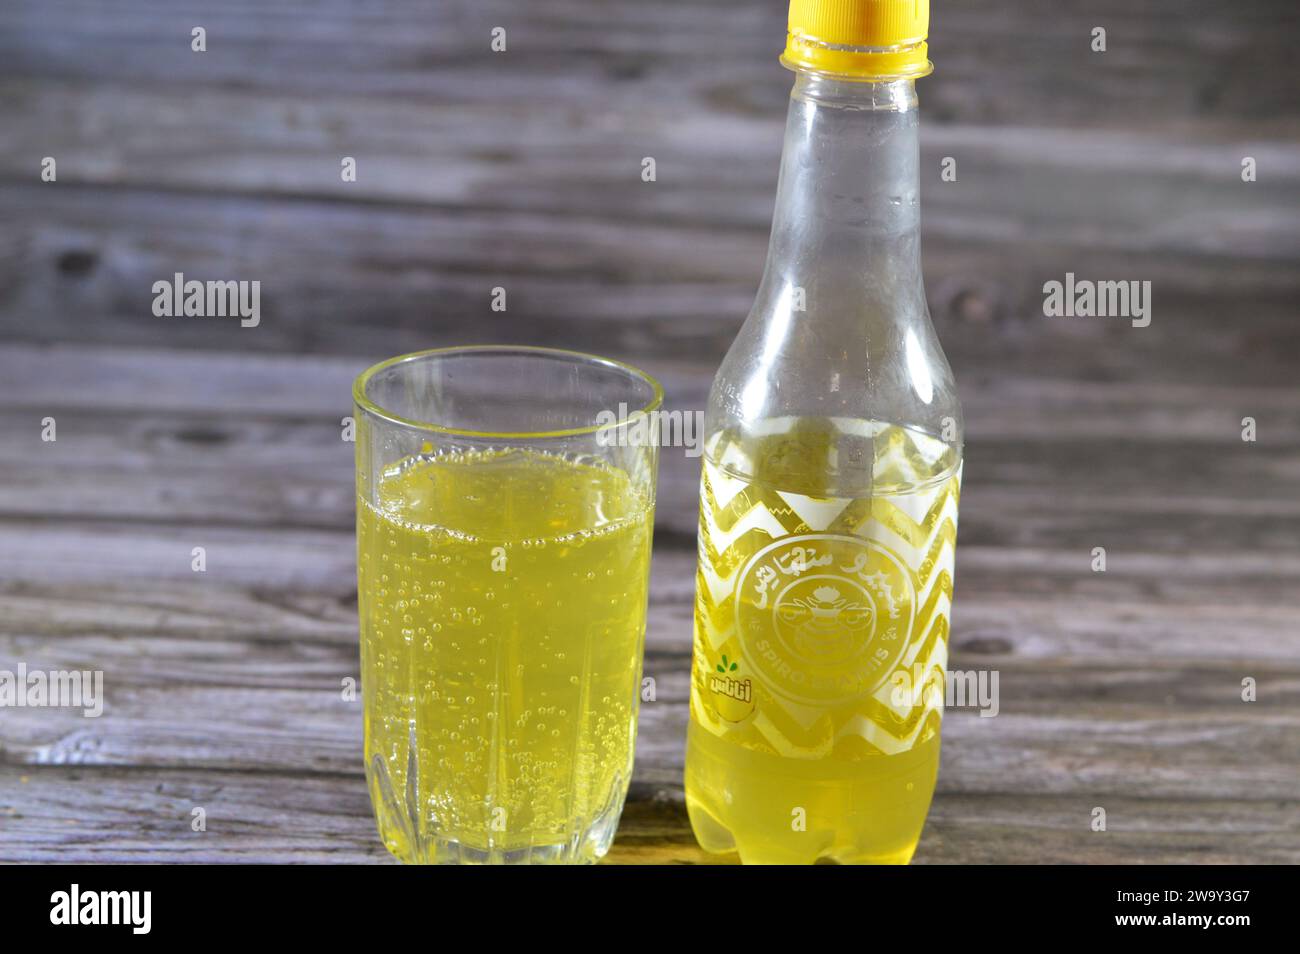 Cairo, Egypt, December 25 2023: Spiro Spathis pineapple soda drink, Spiro Spathis Company was established in 1920 by a Greek Foreigner SpiroSpathis, h Stock Photo